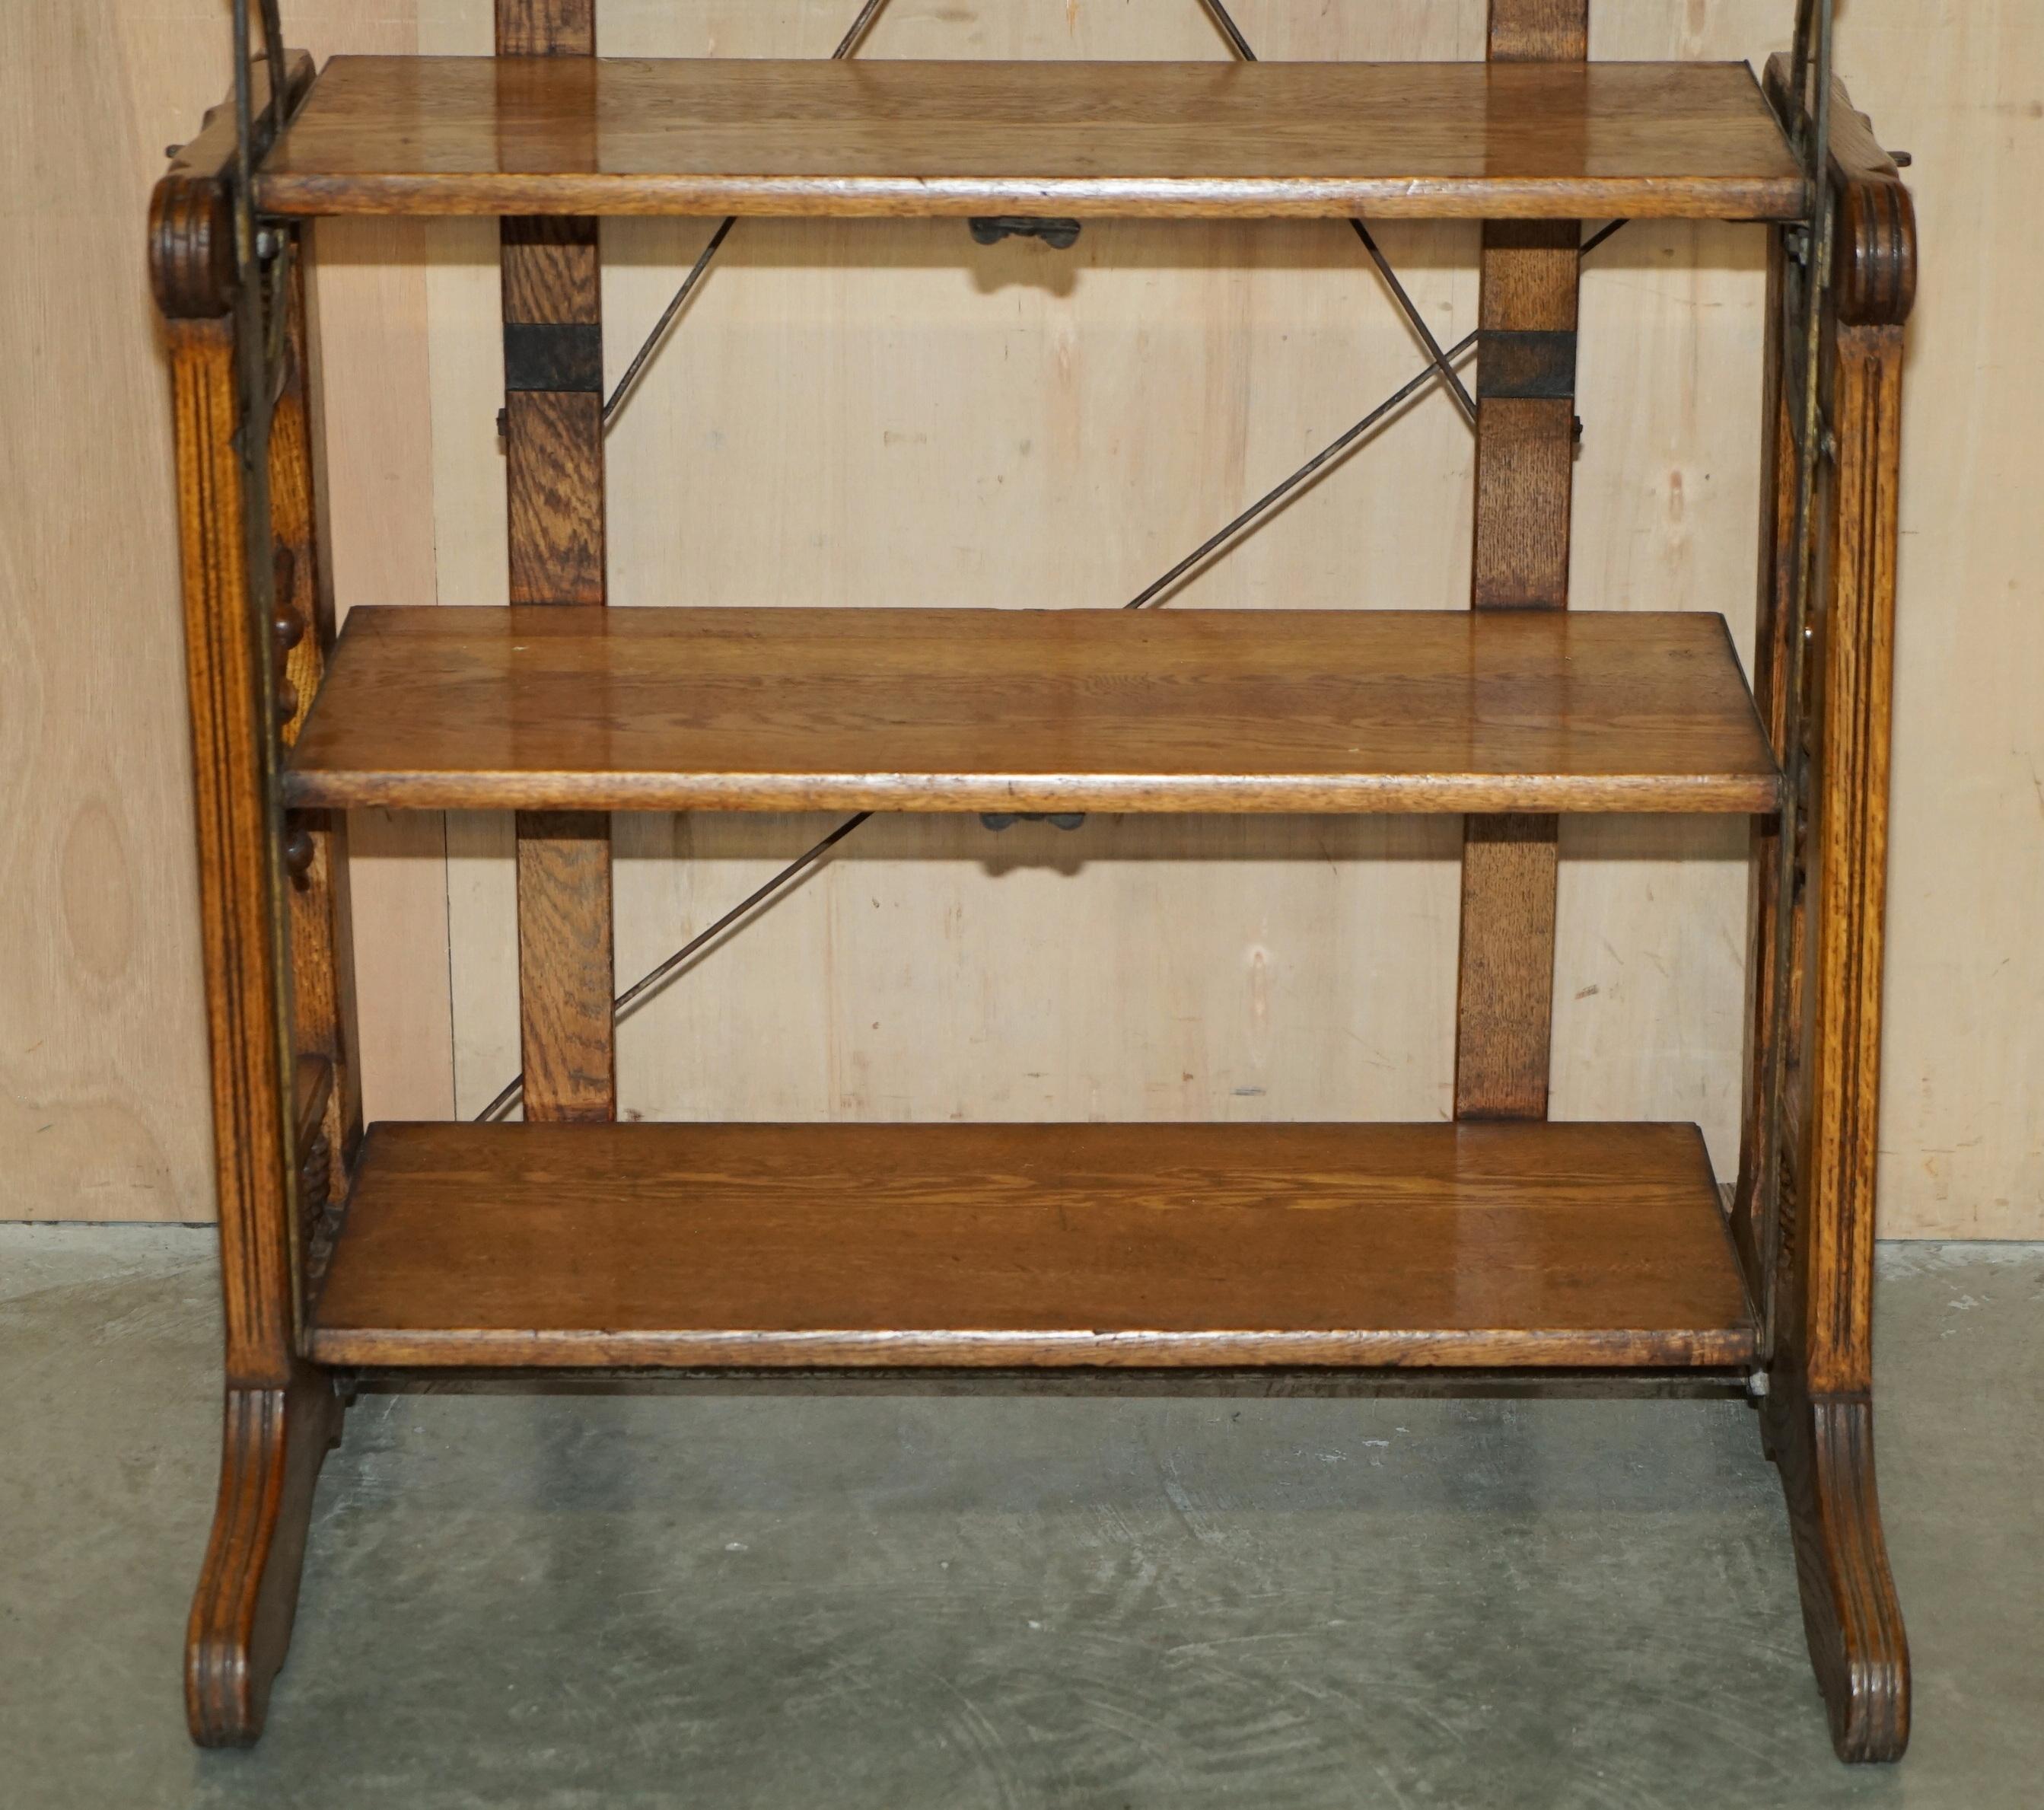 Early 20th Century FULLY RESTORED CiRCA 1910 BOECKH BROTHERS METAMORPHIC BAKERS TABLE BOOKCASE For Sale